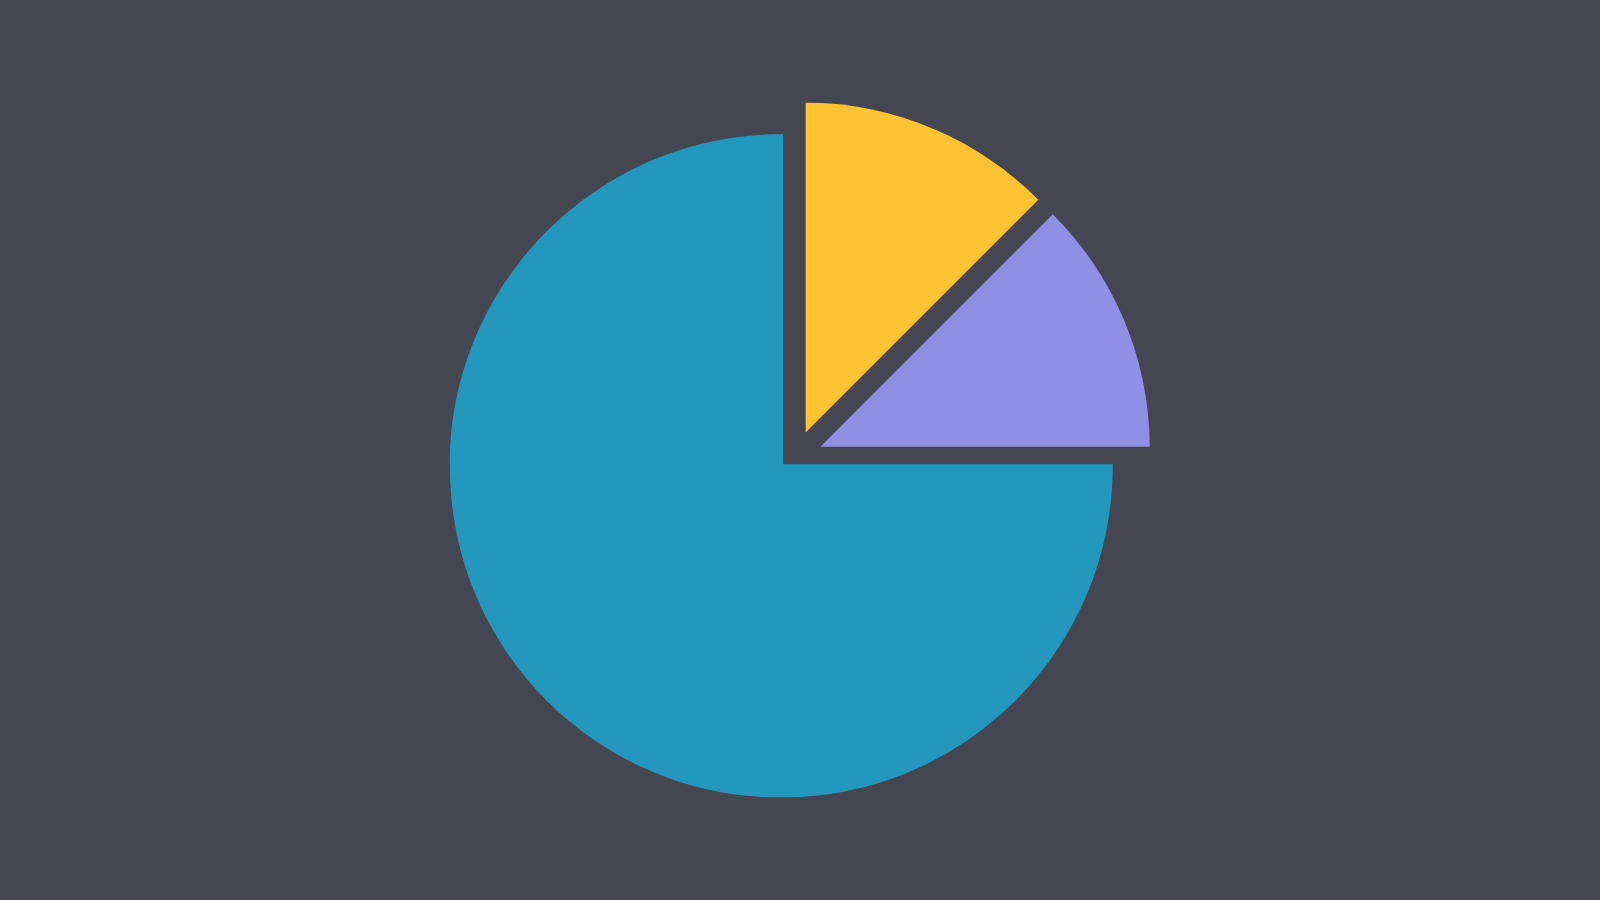 A pie chart thats about 34 blue, 18 yellow, and 18 purple